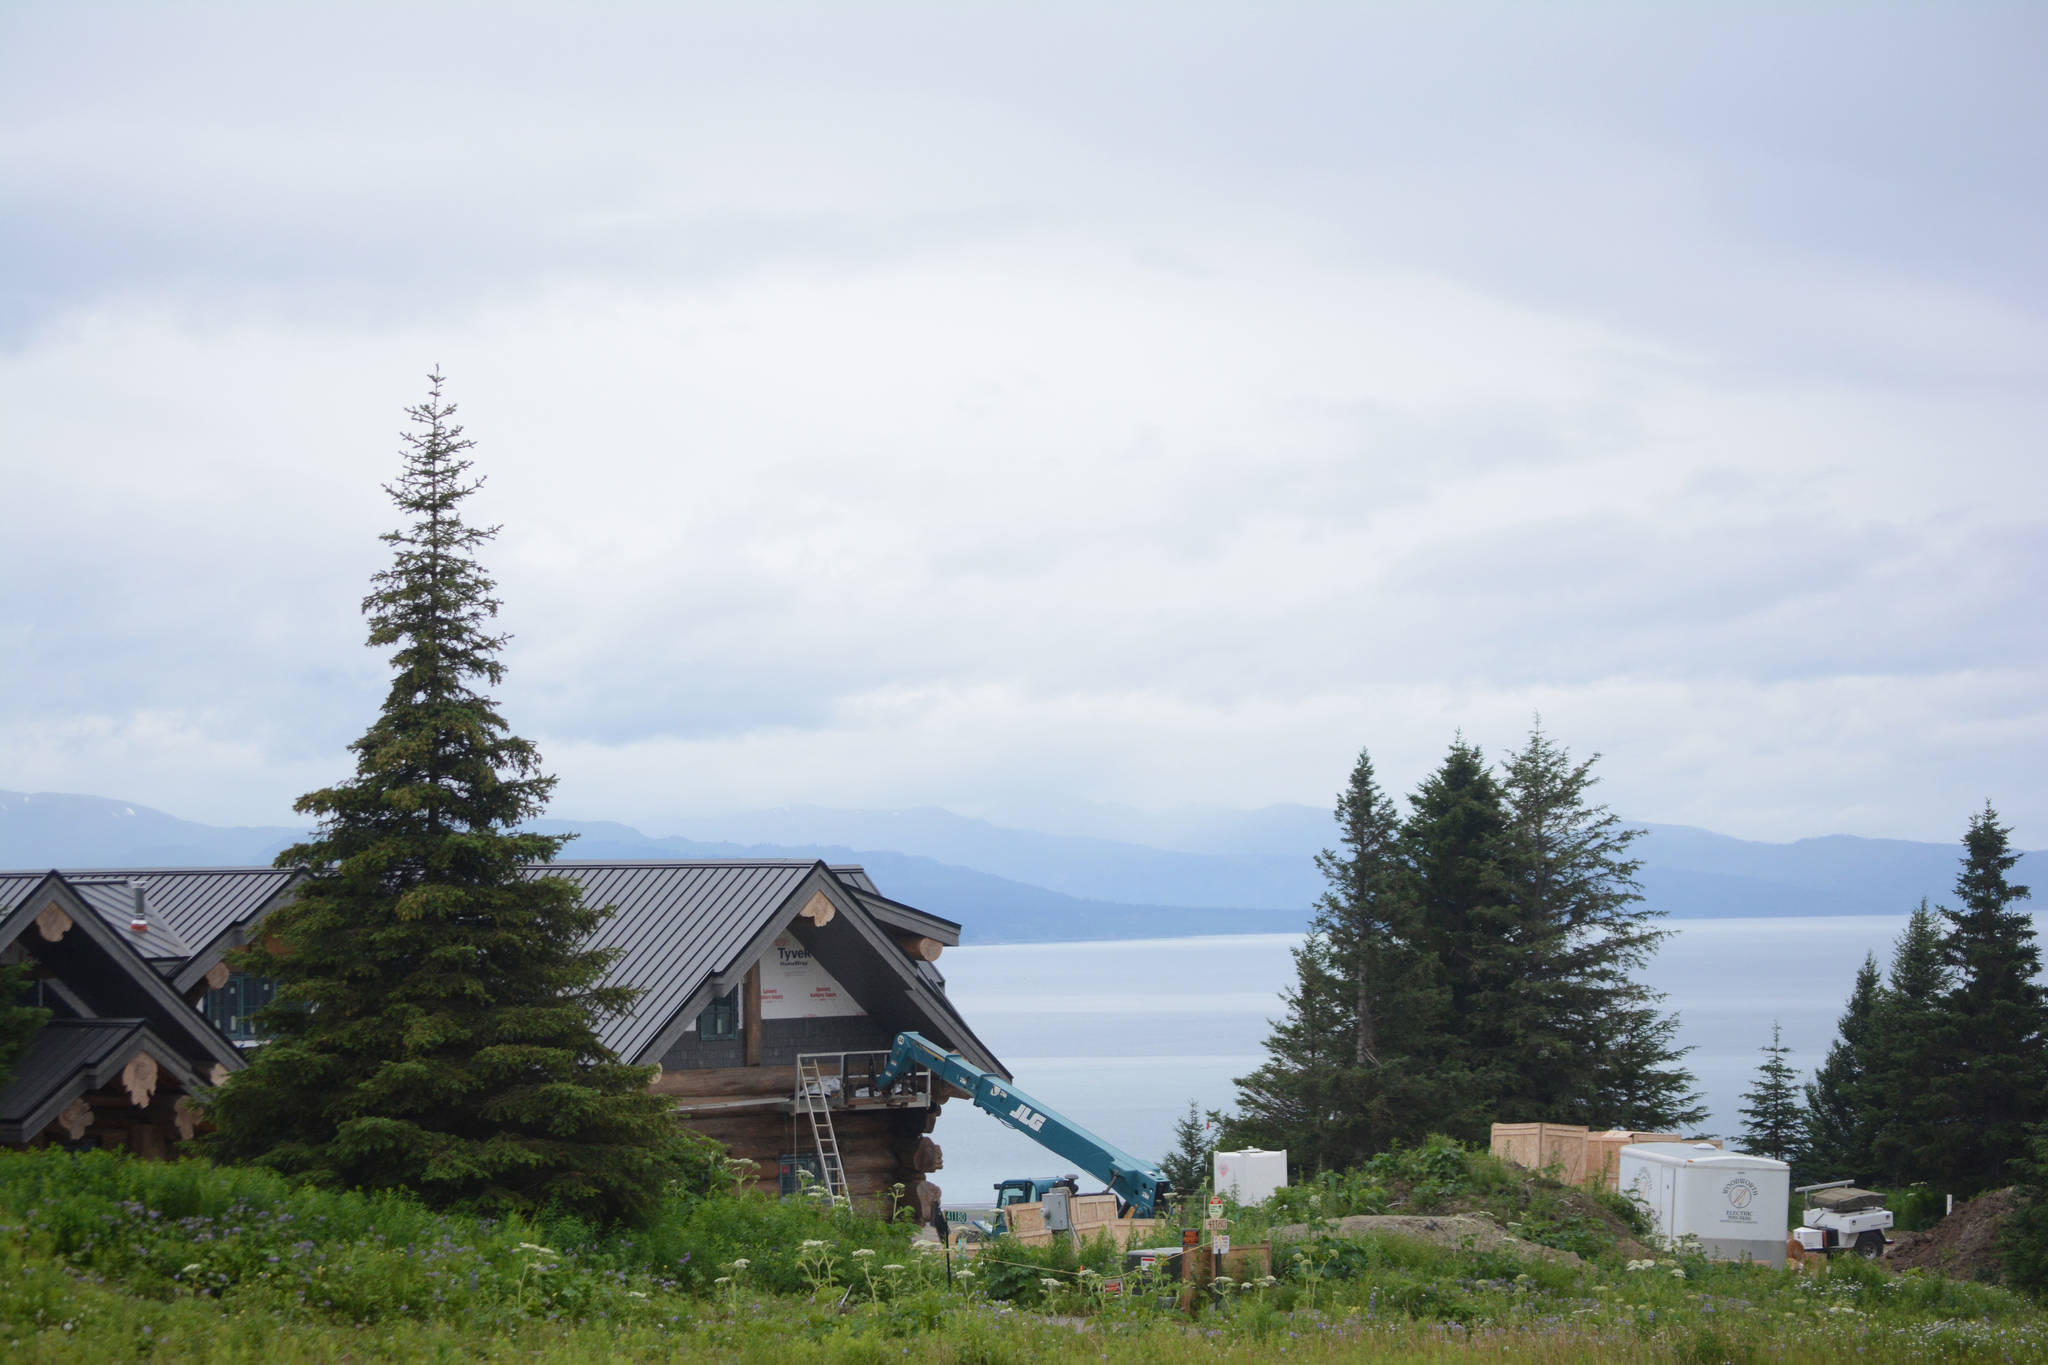 Photo by Michael Armstrong / Homer News                                Part of country-western singer Zac Brown’s log home is visible from Dorothy Drive overlooking Kachemak Bay in Homer, Alaska in this photo taken on July 9, 2018. A pedestrian easement to the right in this photo runs between Brown’s property and his neighbor. Brown and other neighbors at the end of the rural road have petitioned to vacate a north-south section line easement that crosses Dorothy Drive and also runs south to a neighboring subdivision.